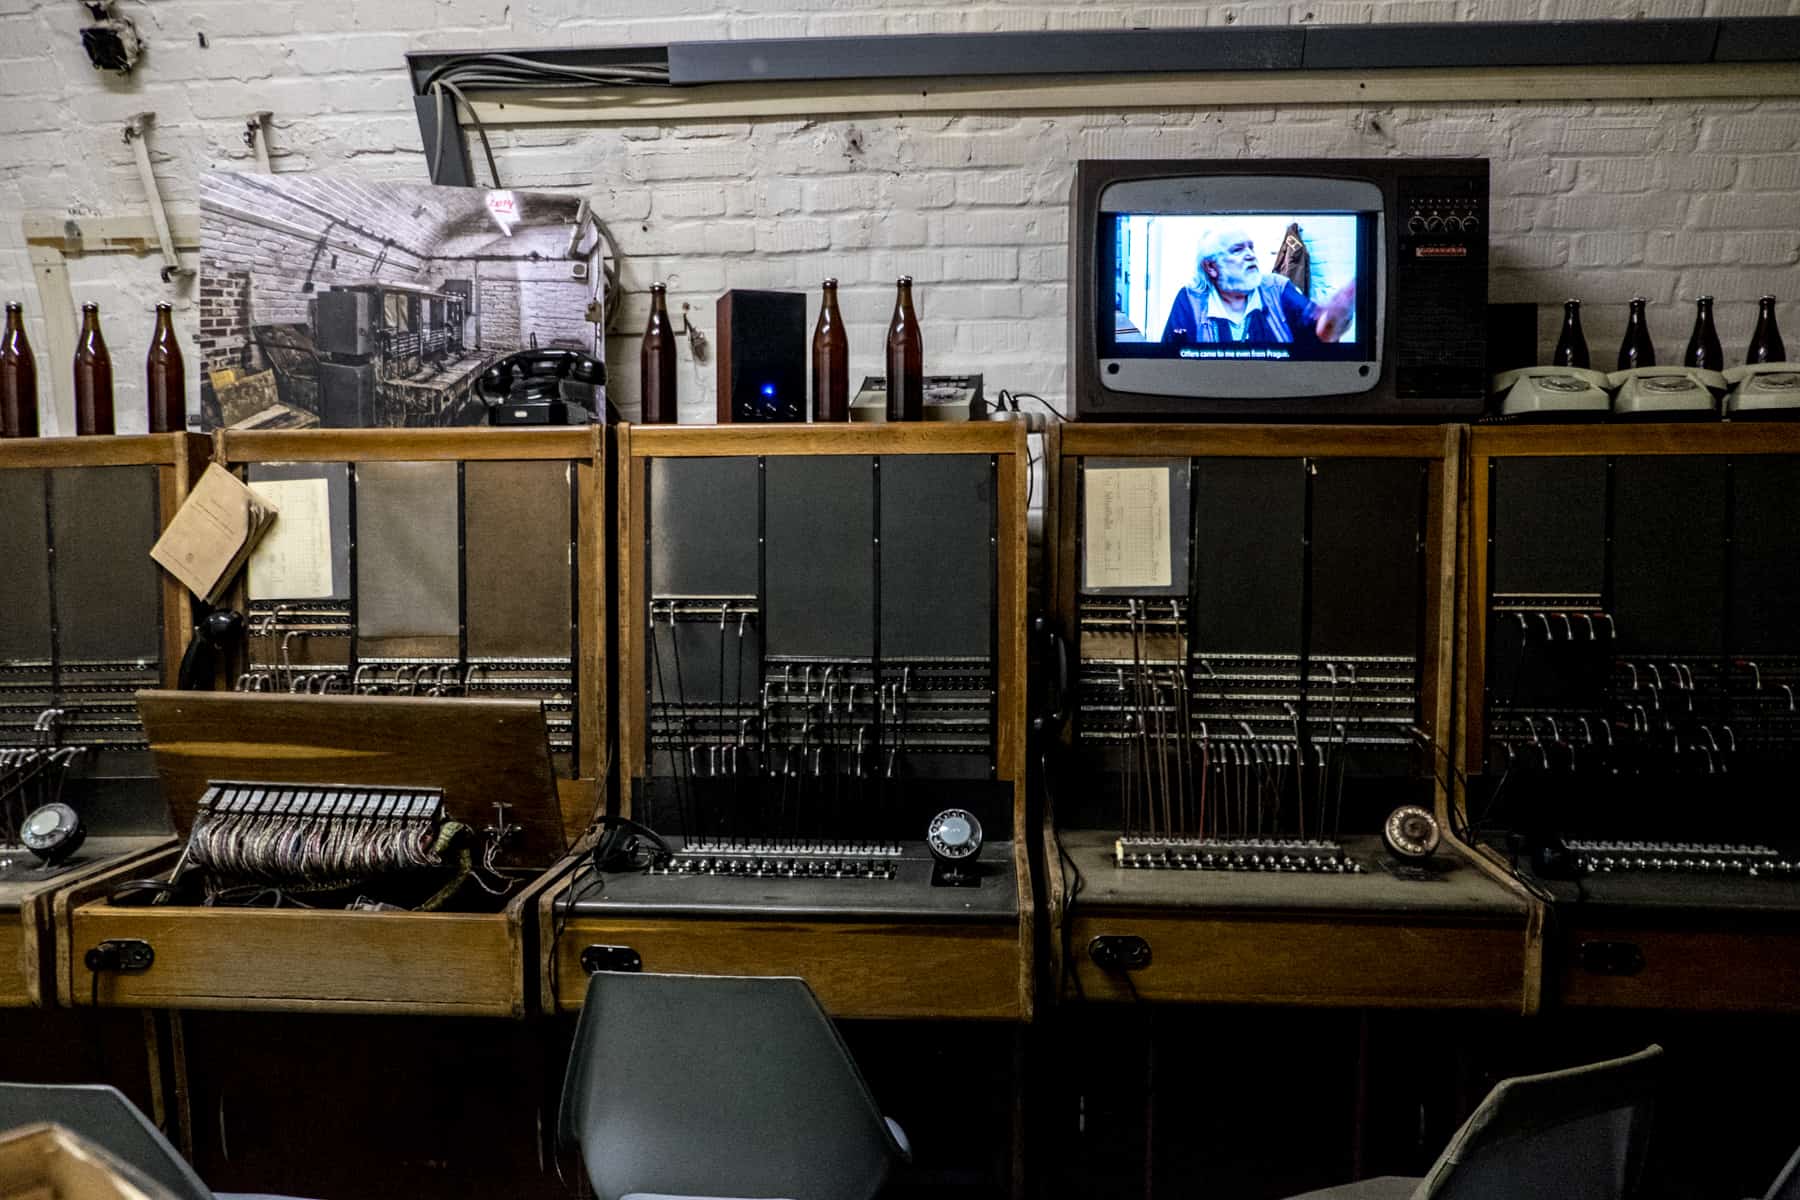 Old communications machines, wires and empty beer bottles in the 10-Z Bunker in Brno. A TV playing a video rests on top, as part of the exhibition. 